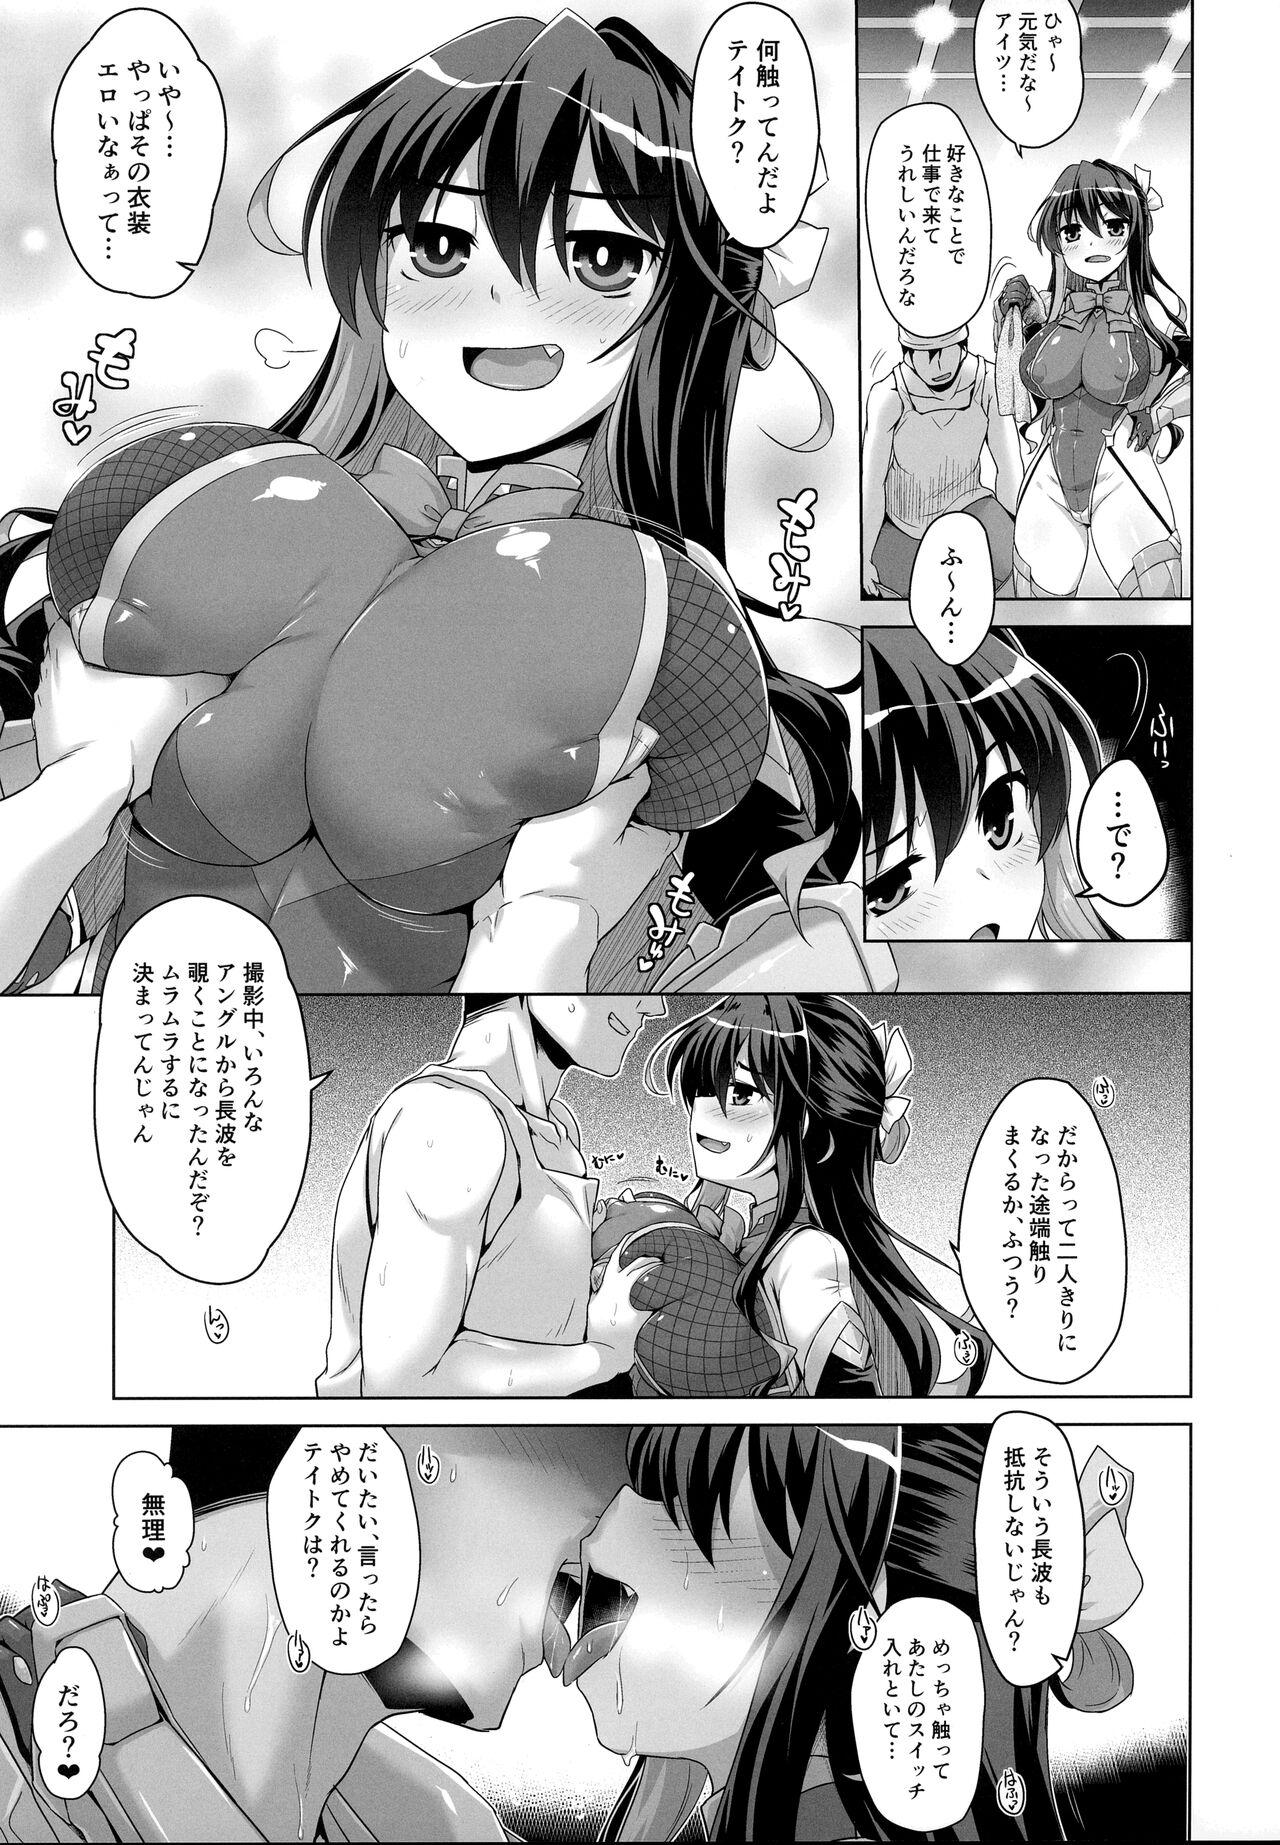 Plump みるきーDD～長波After shooting～ - Kantai collection Movie - Page 4